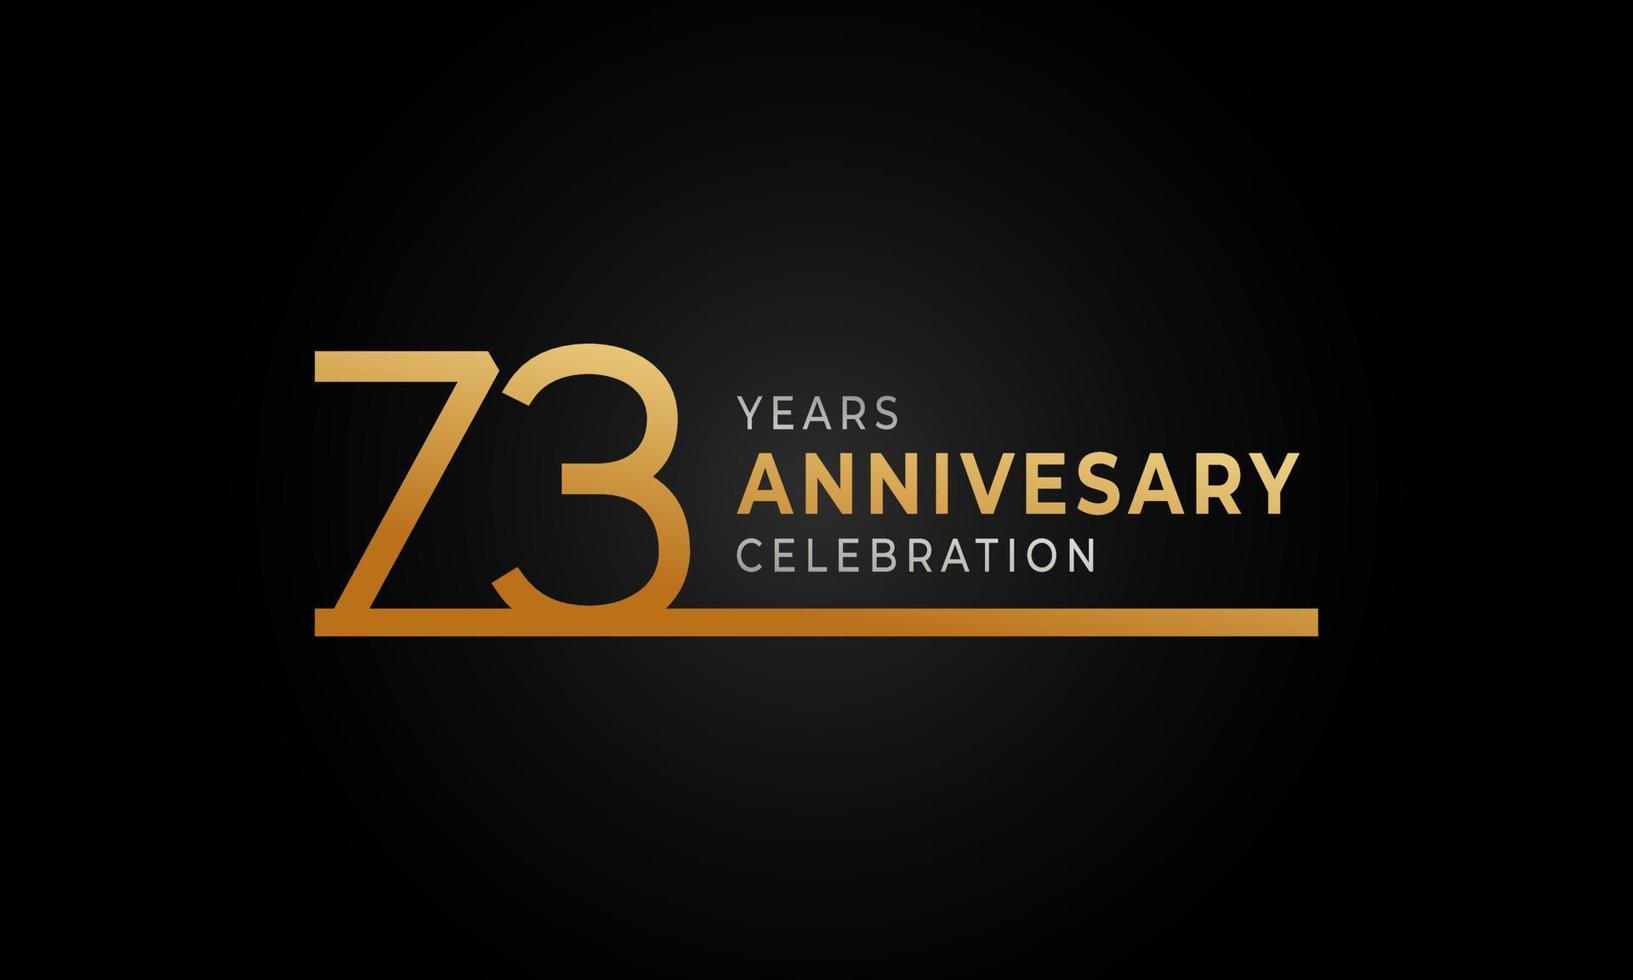 73 Year Anniversary Celebration Logotype with Single Line Golden and Silver Color for Celebration Event, Wedding, Greeting card, and Invitation Isolated on Black Background vector